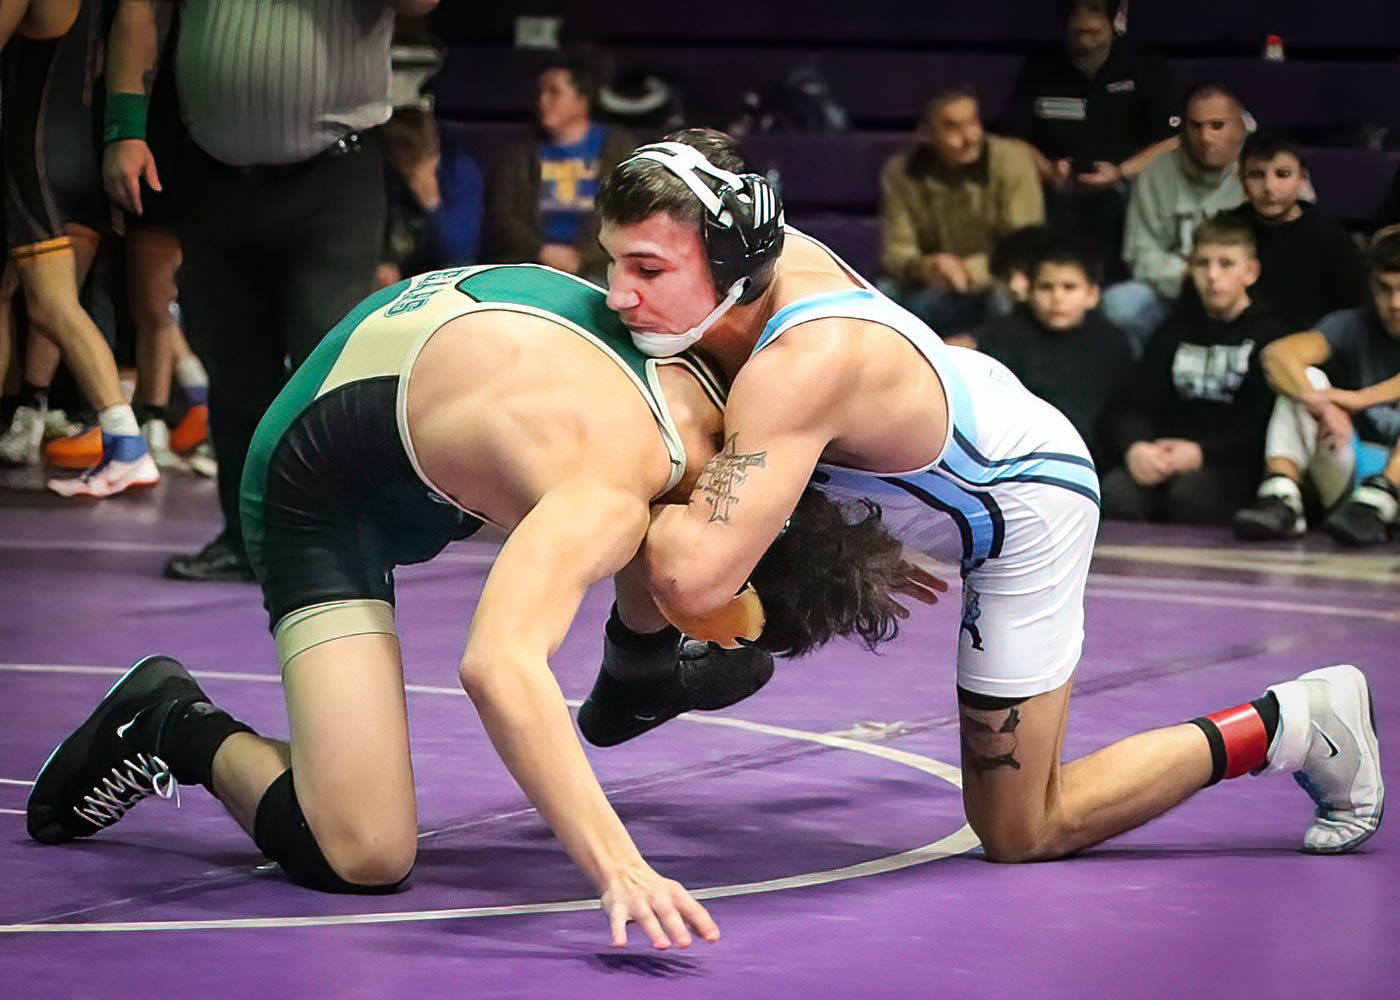 Trinidad’s Eddie Bowman made quick work of Bear Creek’s Doni Saleh in this 138 lb. quarterfinal. Bowman won by fall in 0:26, and finished 1st in the tourney.